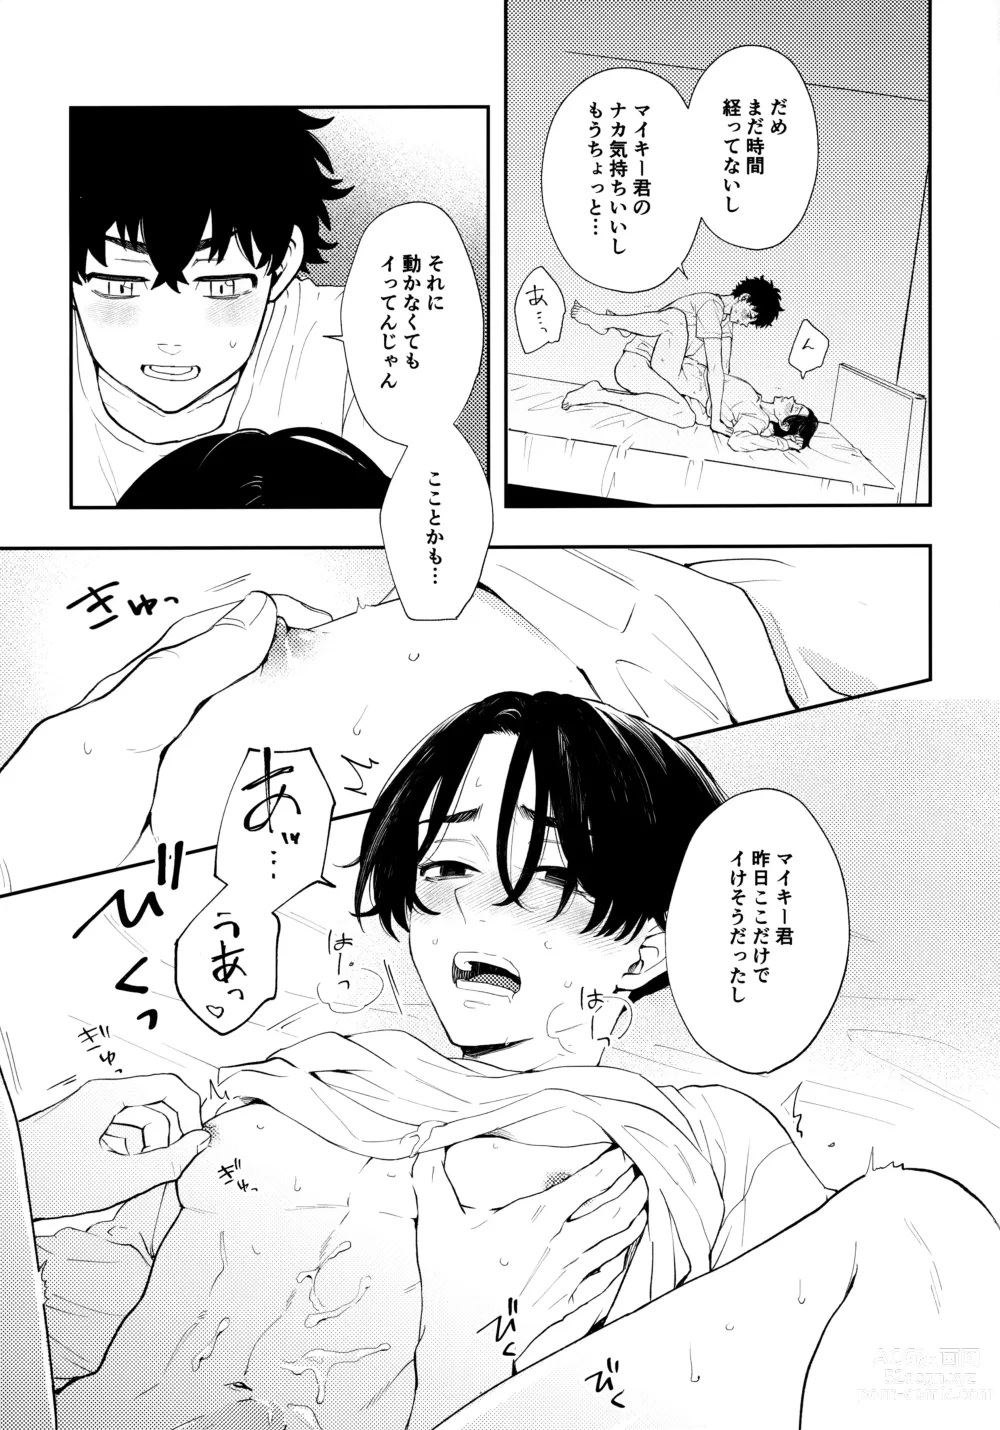 Page 40 of doujinshi Count 5